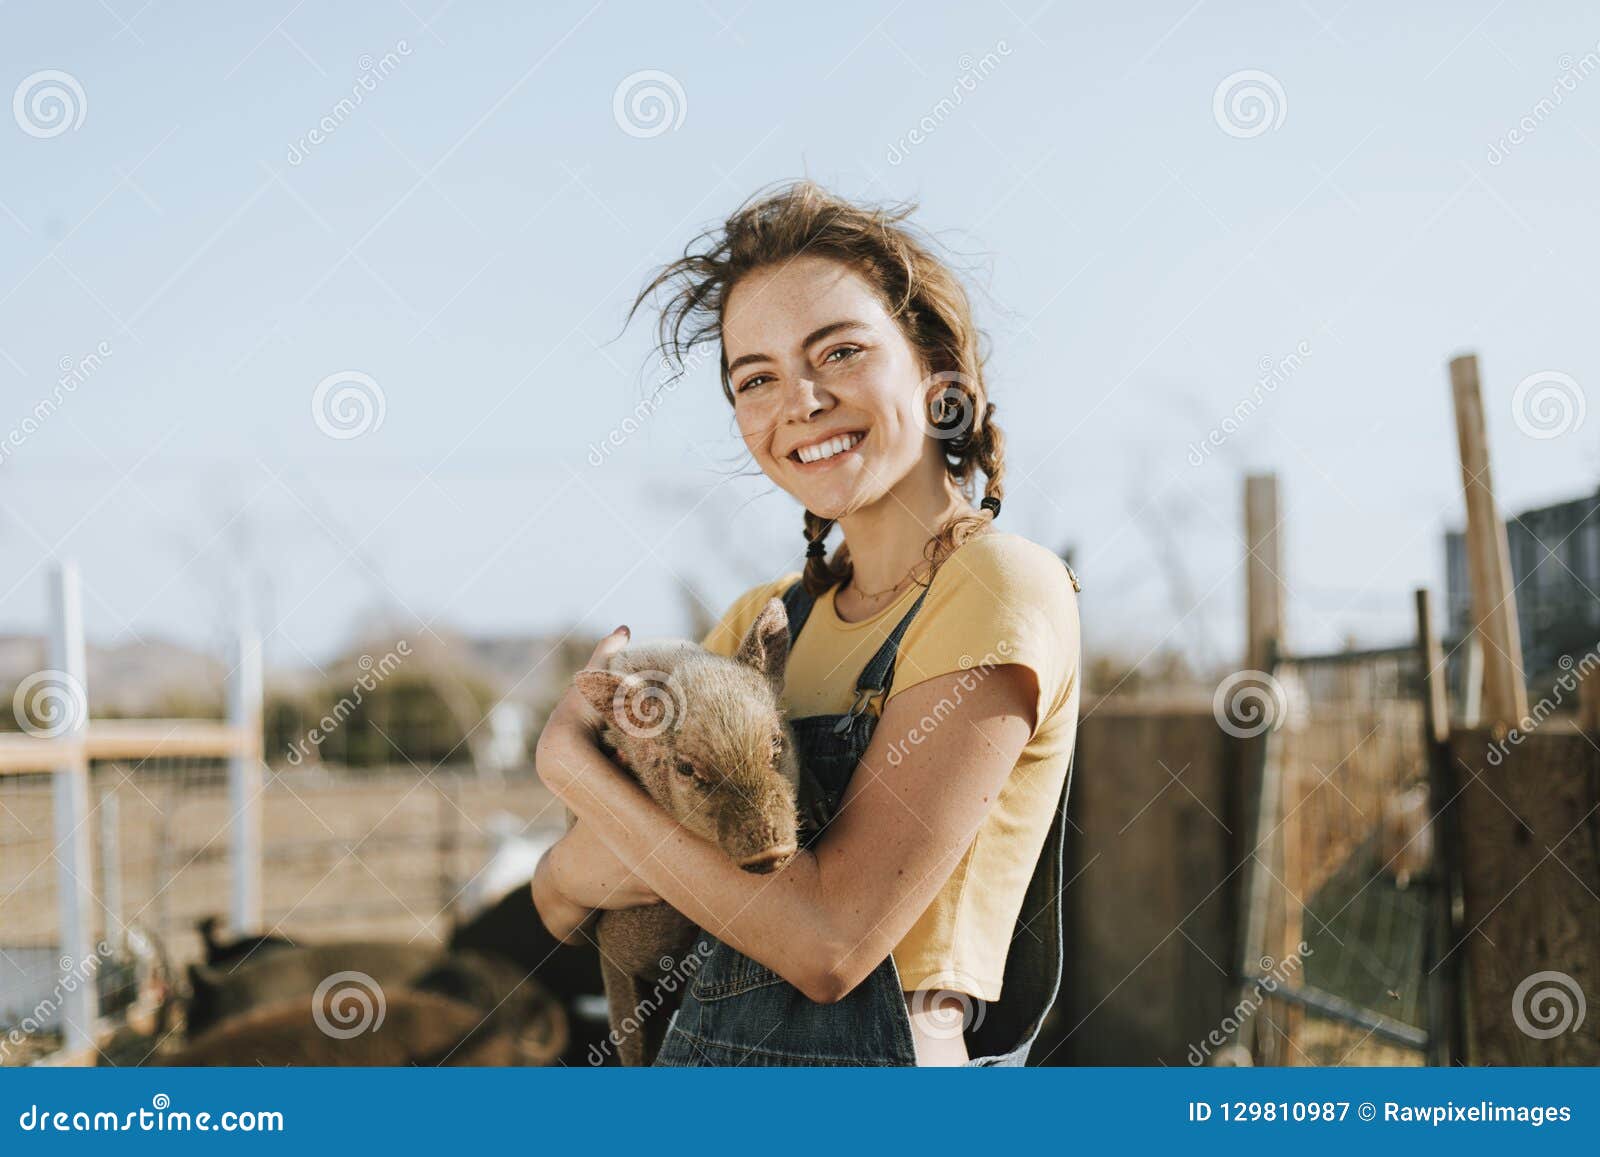 young volunteer with a piglet, the sanctuary at soledad, mojave